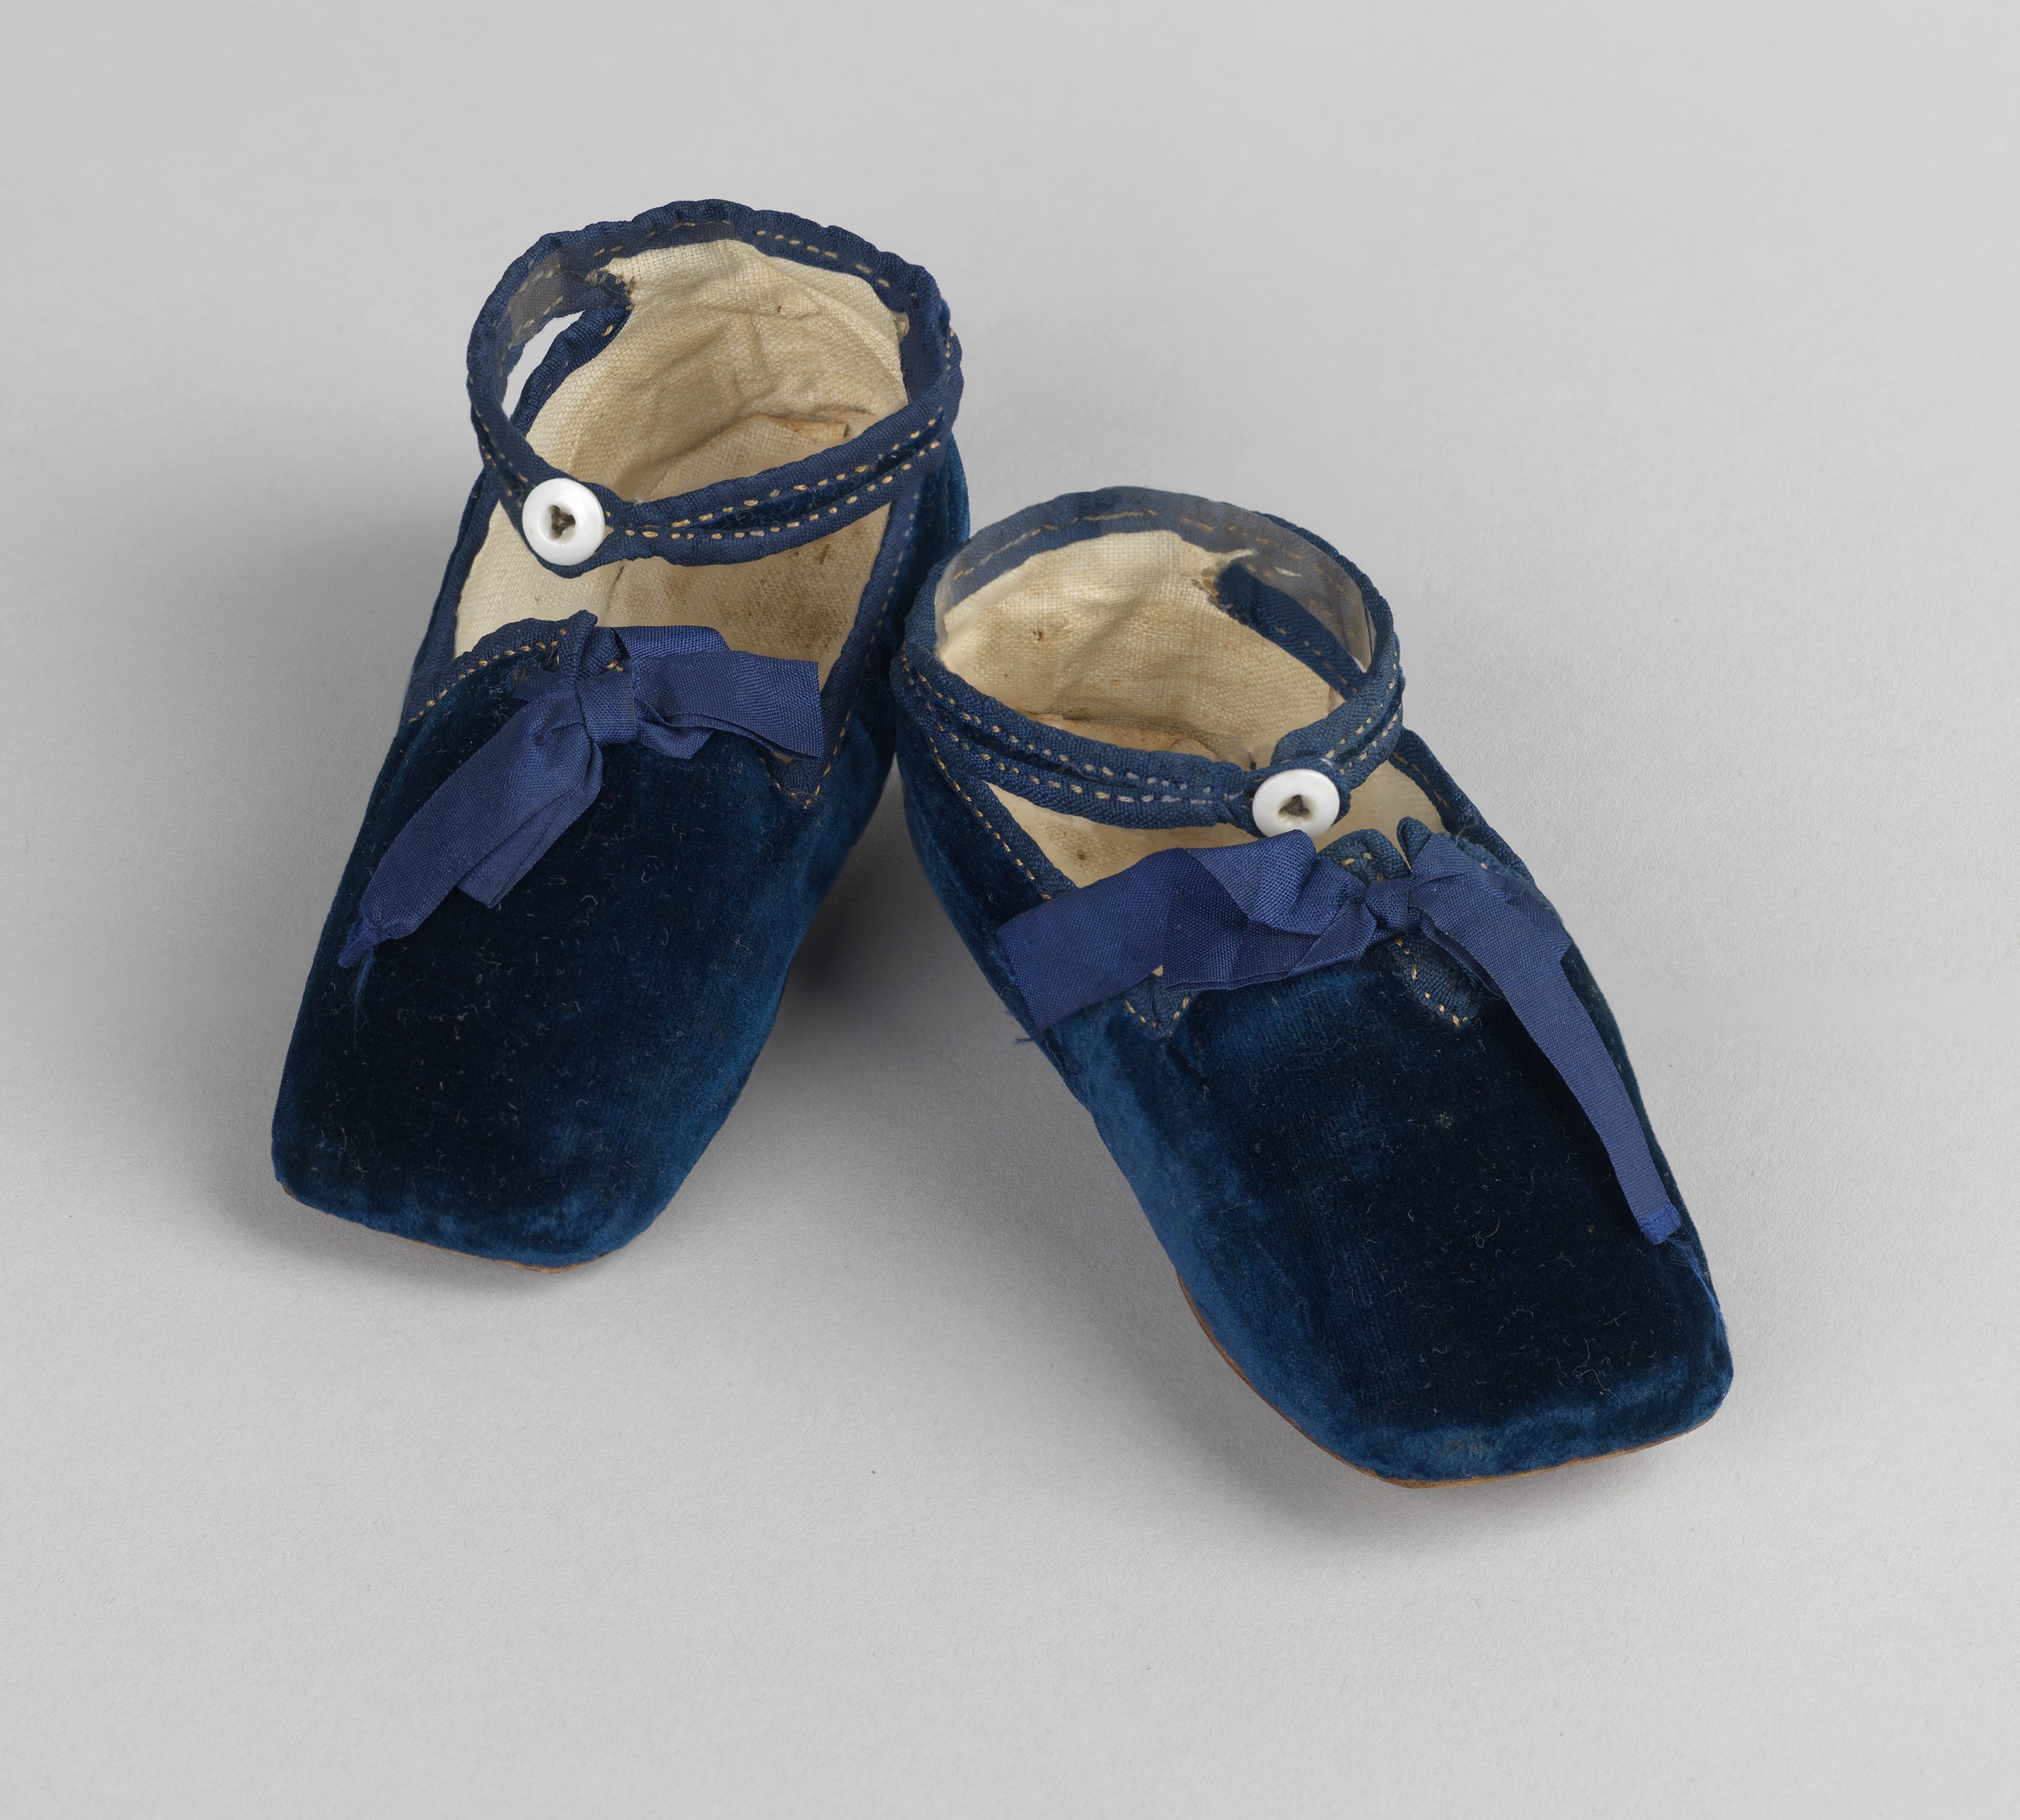 The first shoes worn by Prince Albert Edward (later King Edward VII), which will go on display as part of the Buckingham Palace summer exhibition which opens in July.